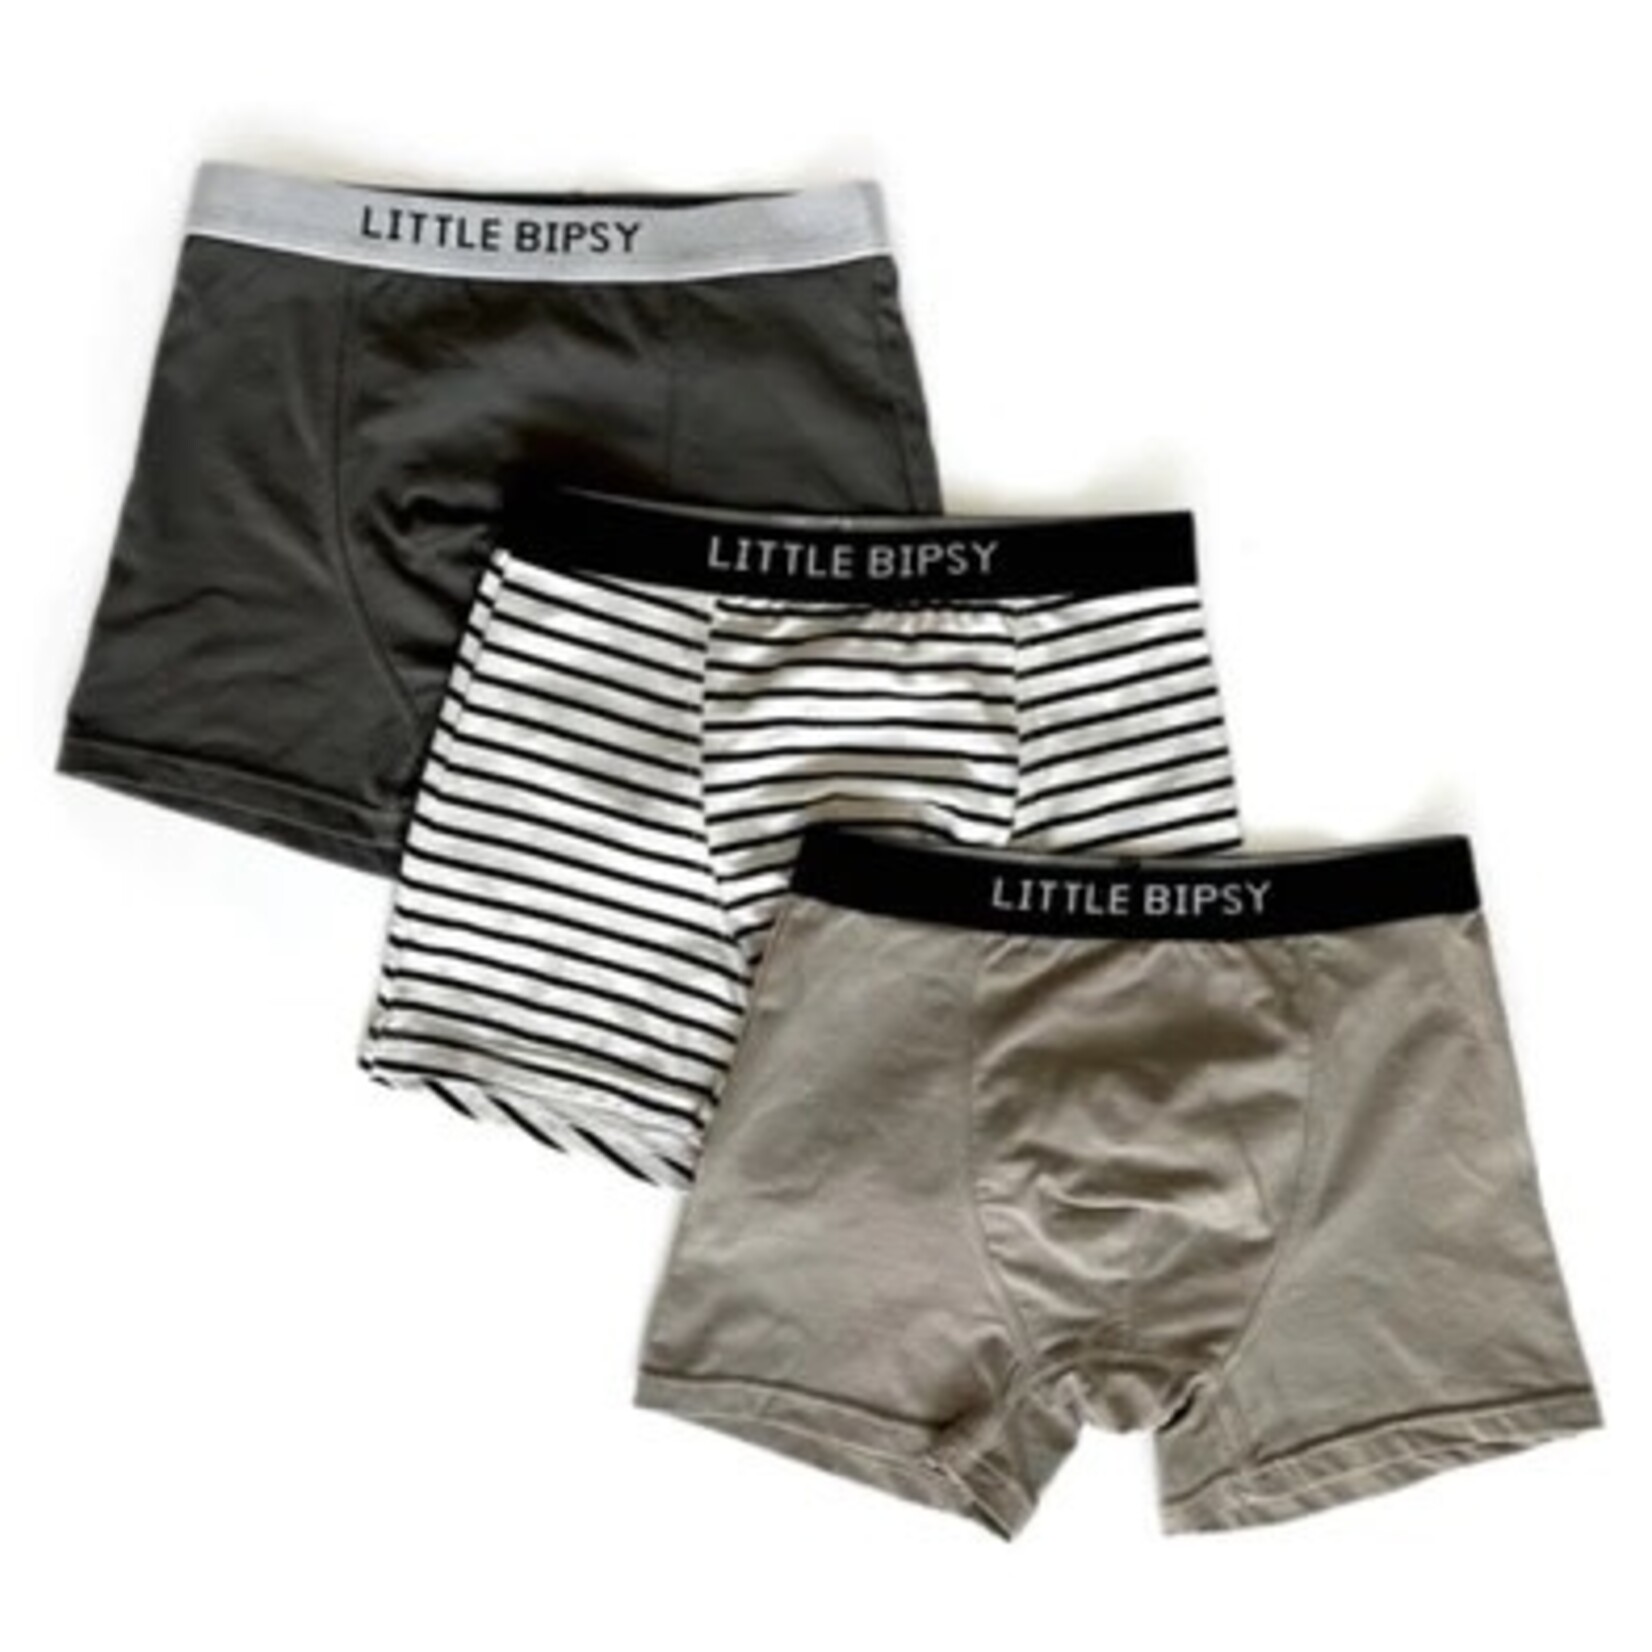 Little Bipsy Boxer Brief 3 PK - Pewter